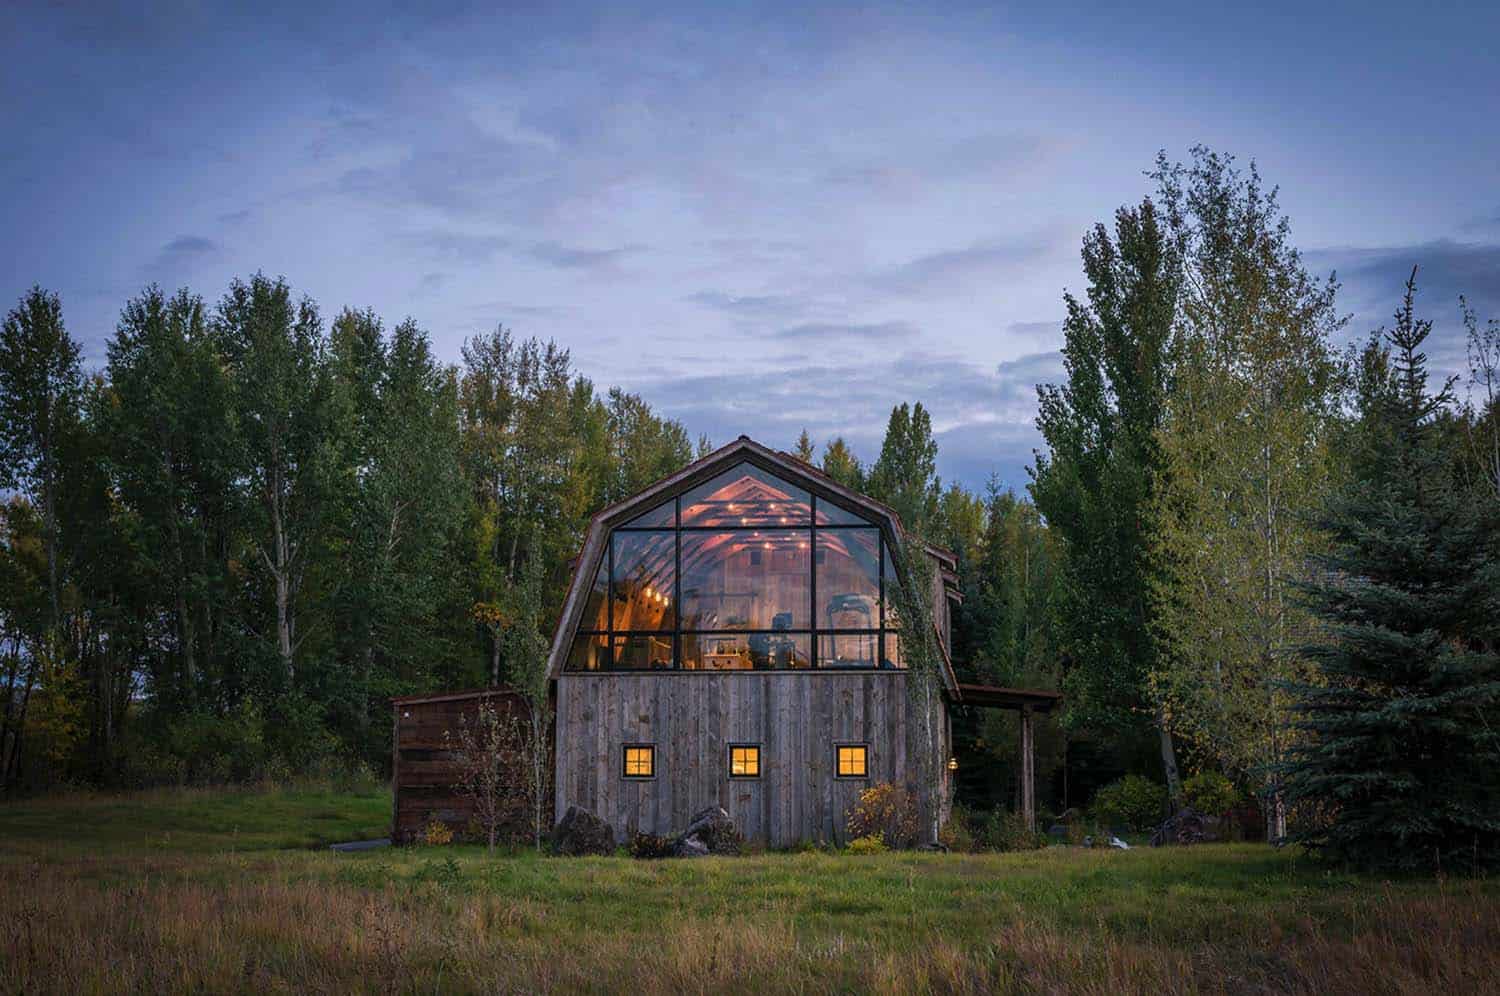 Rustic meets modern in stunning barn guest house in Wyoming